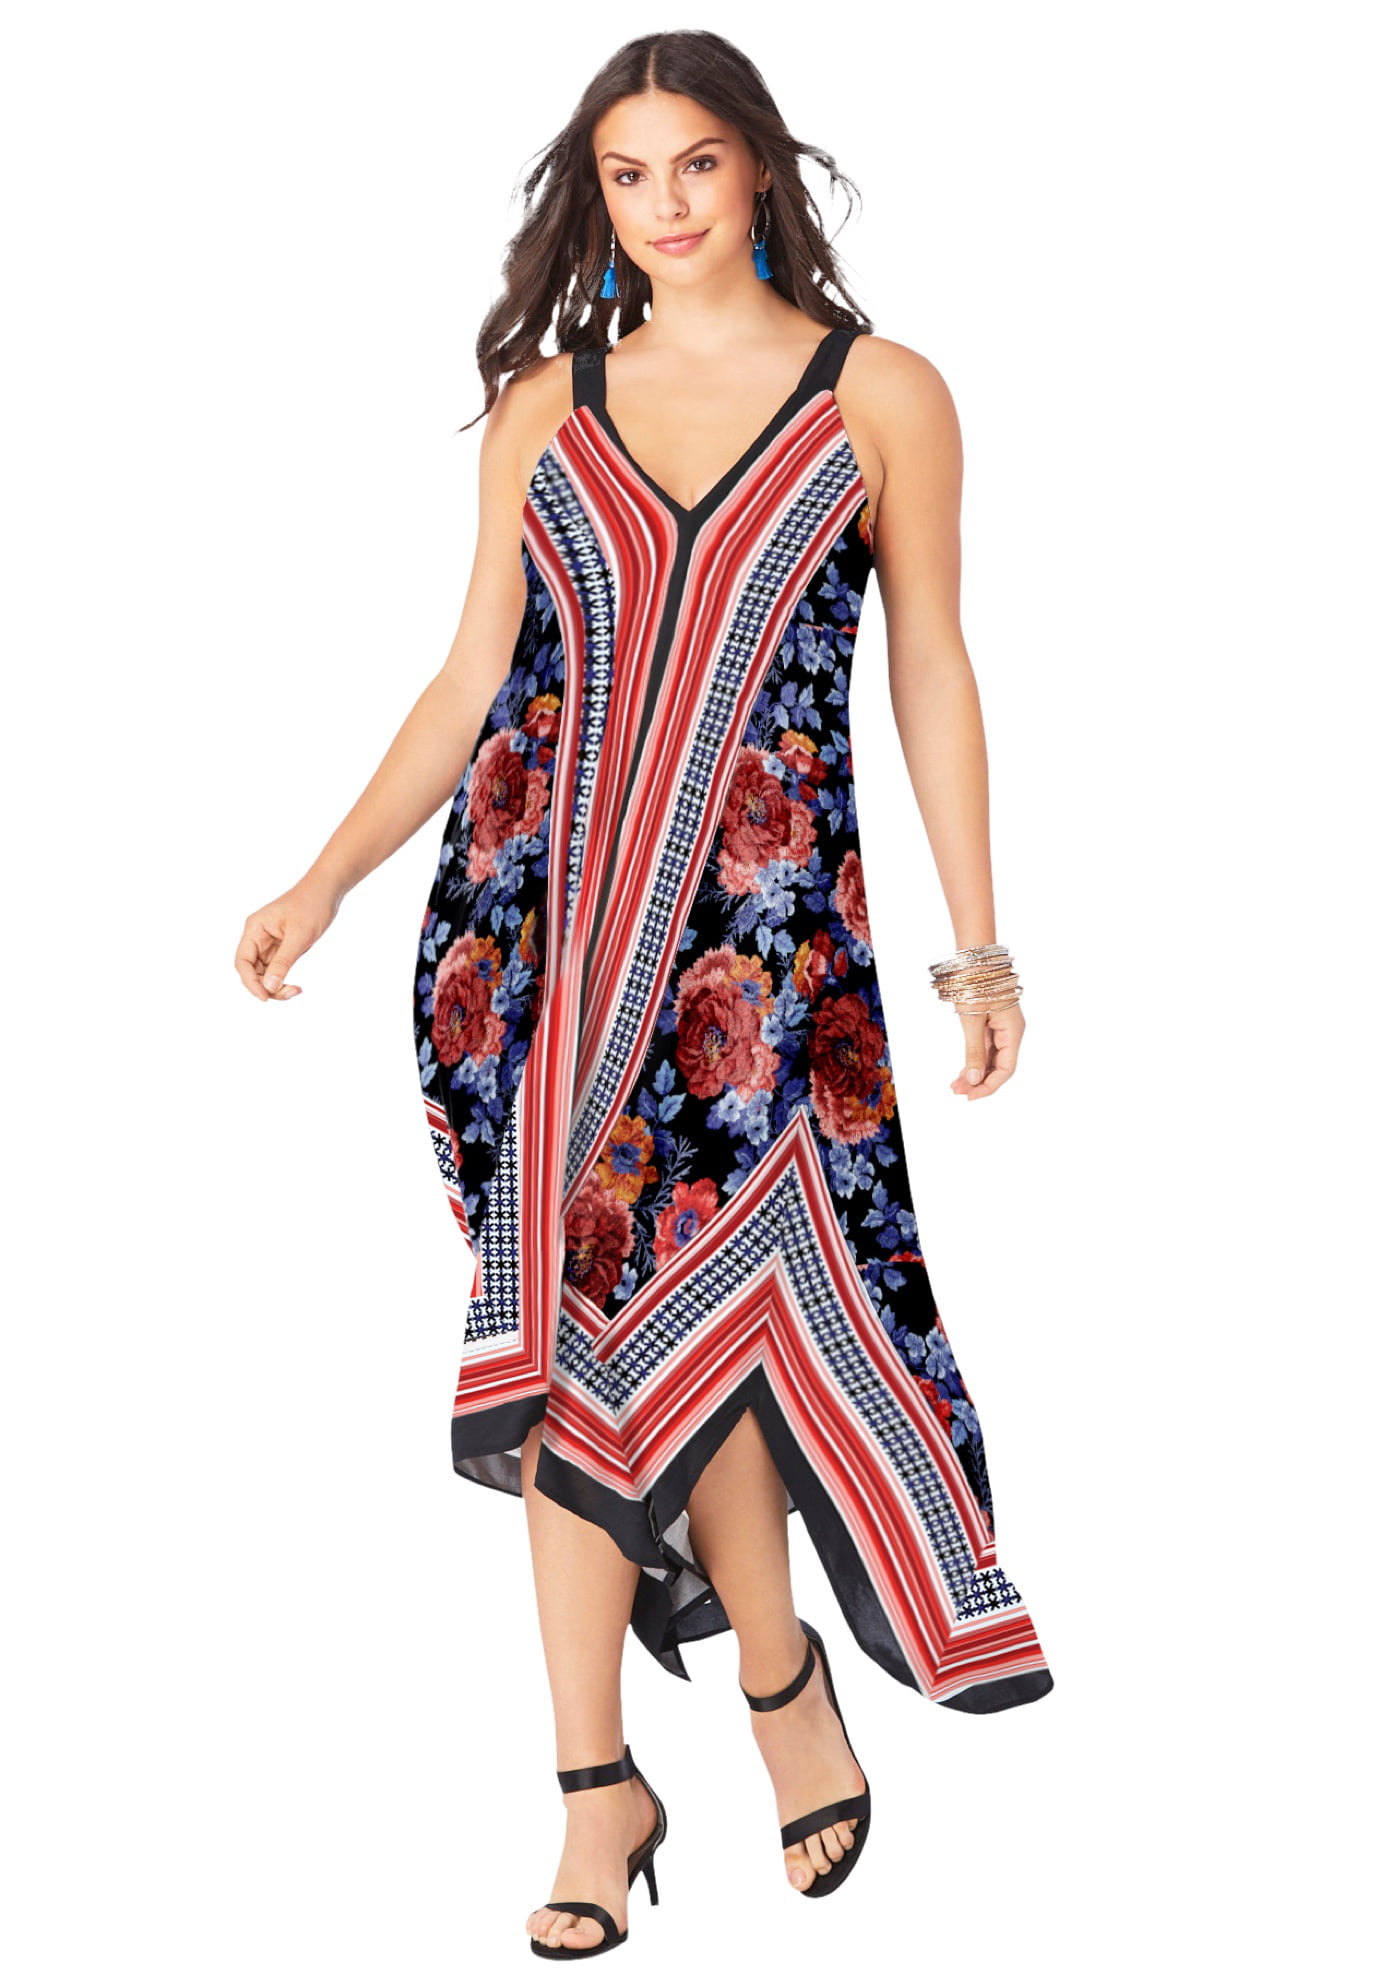 Summer Women Spaghetti Strap Colorful Printed Pockets Loose Dress with Scarf 